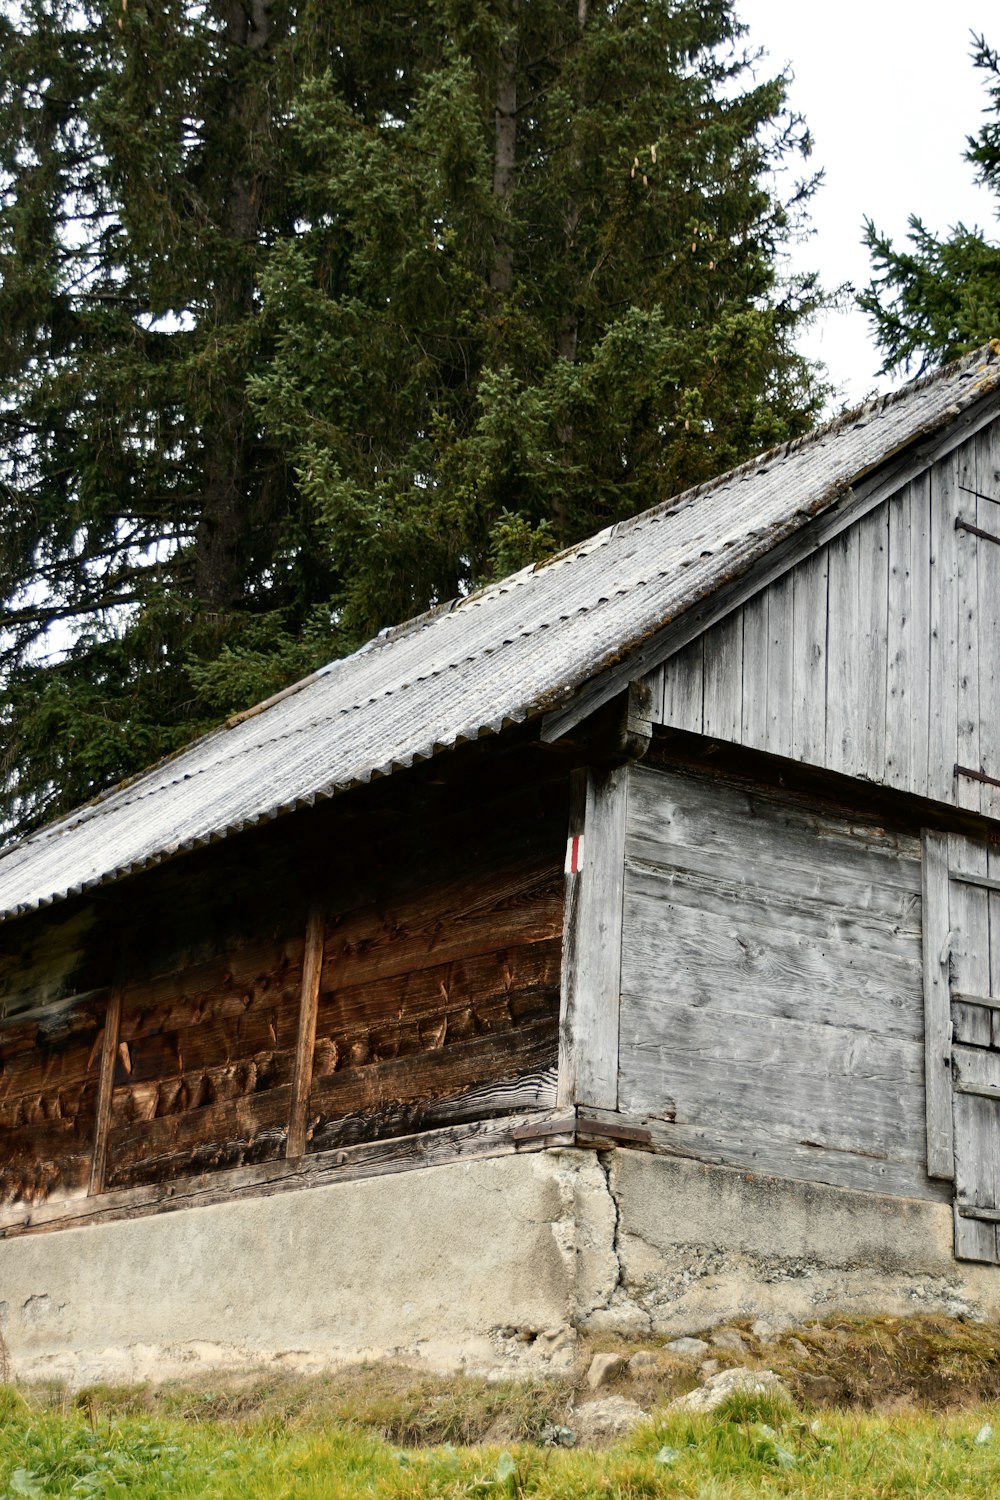 an old wooden building with a metal roof